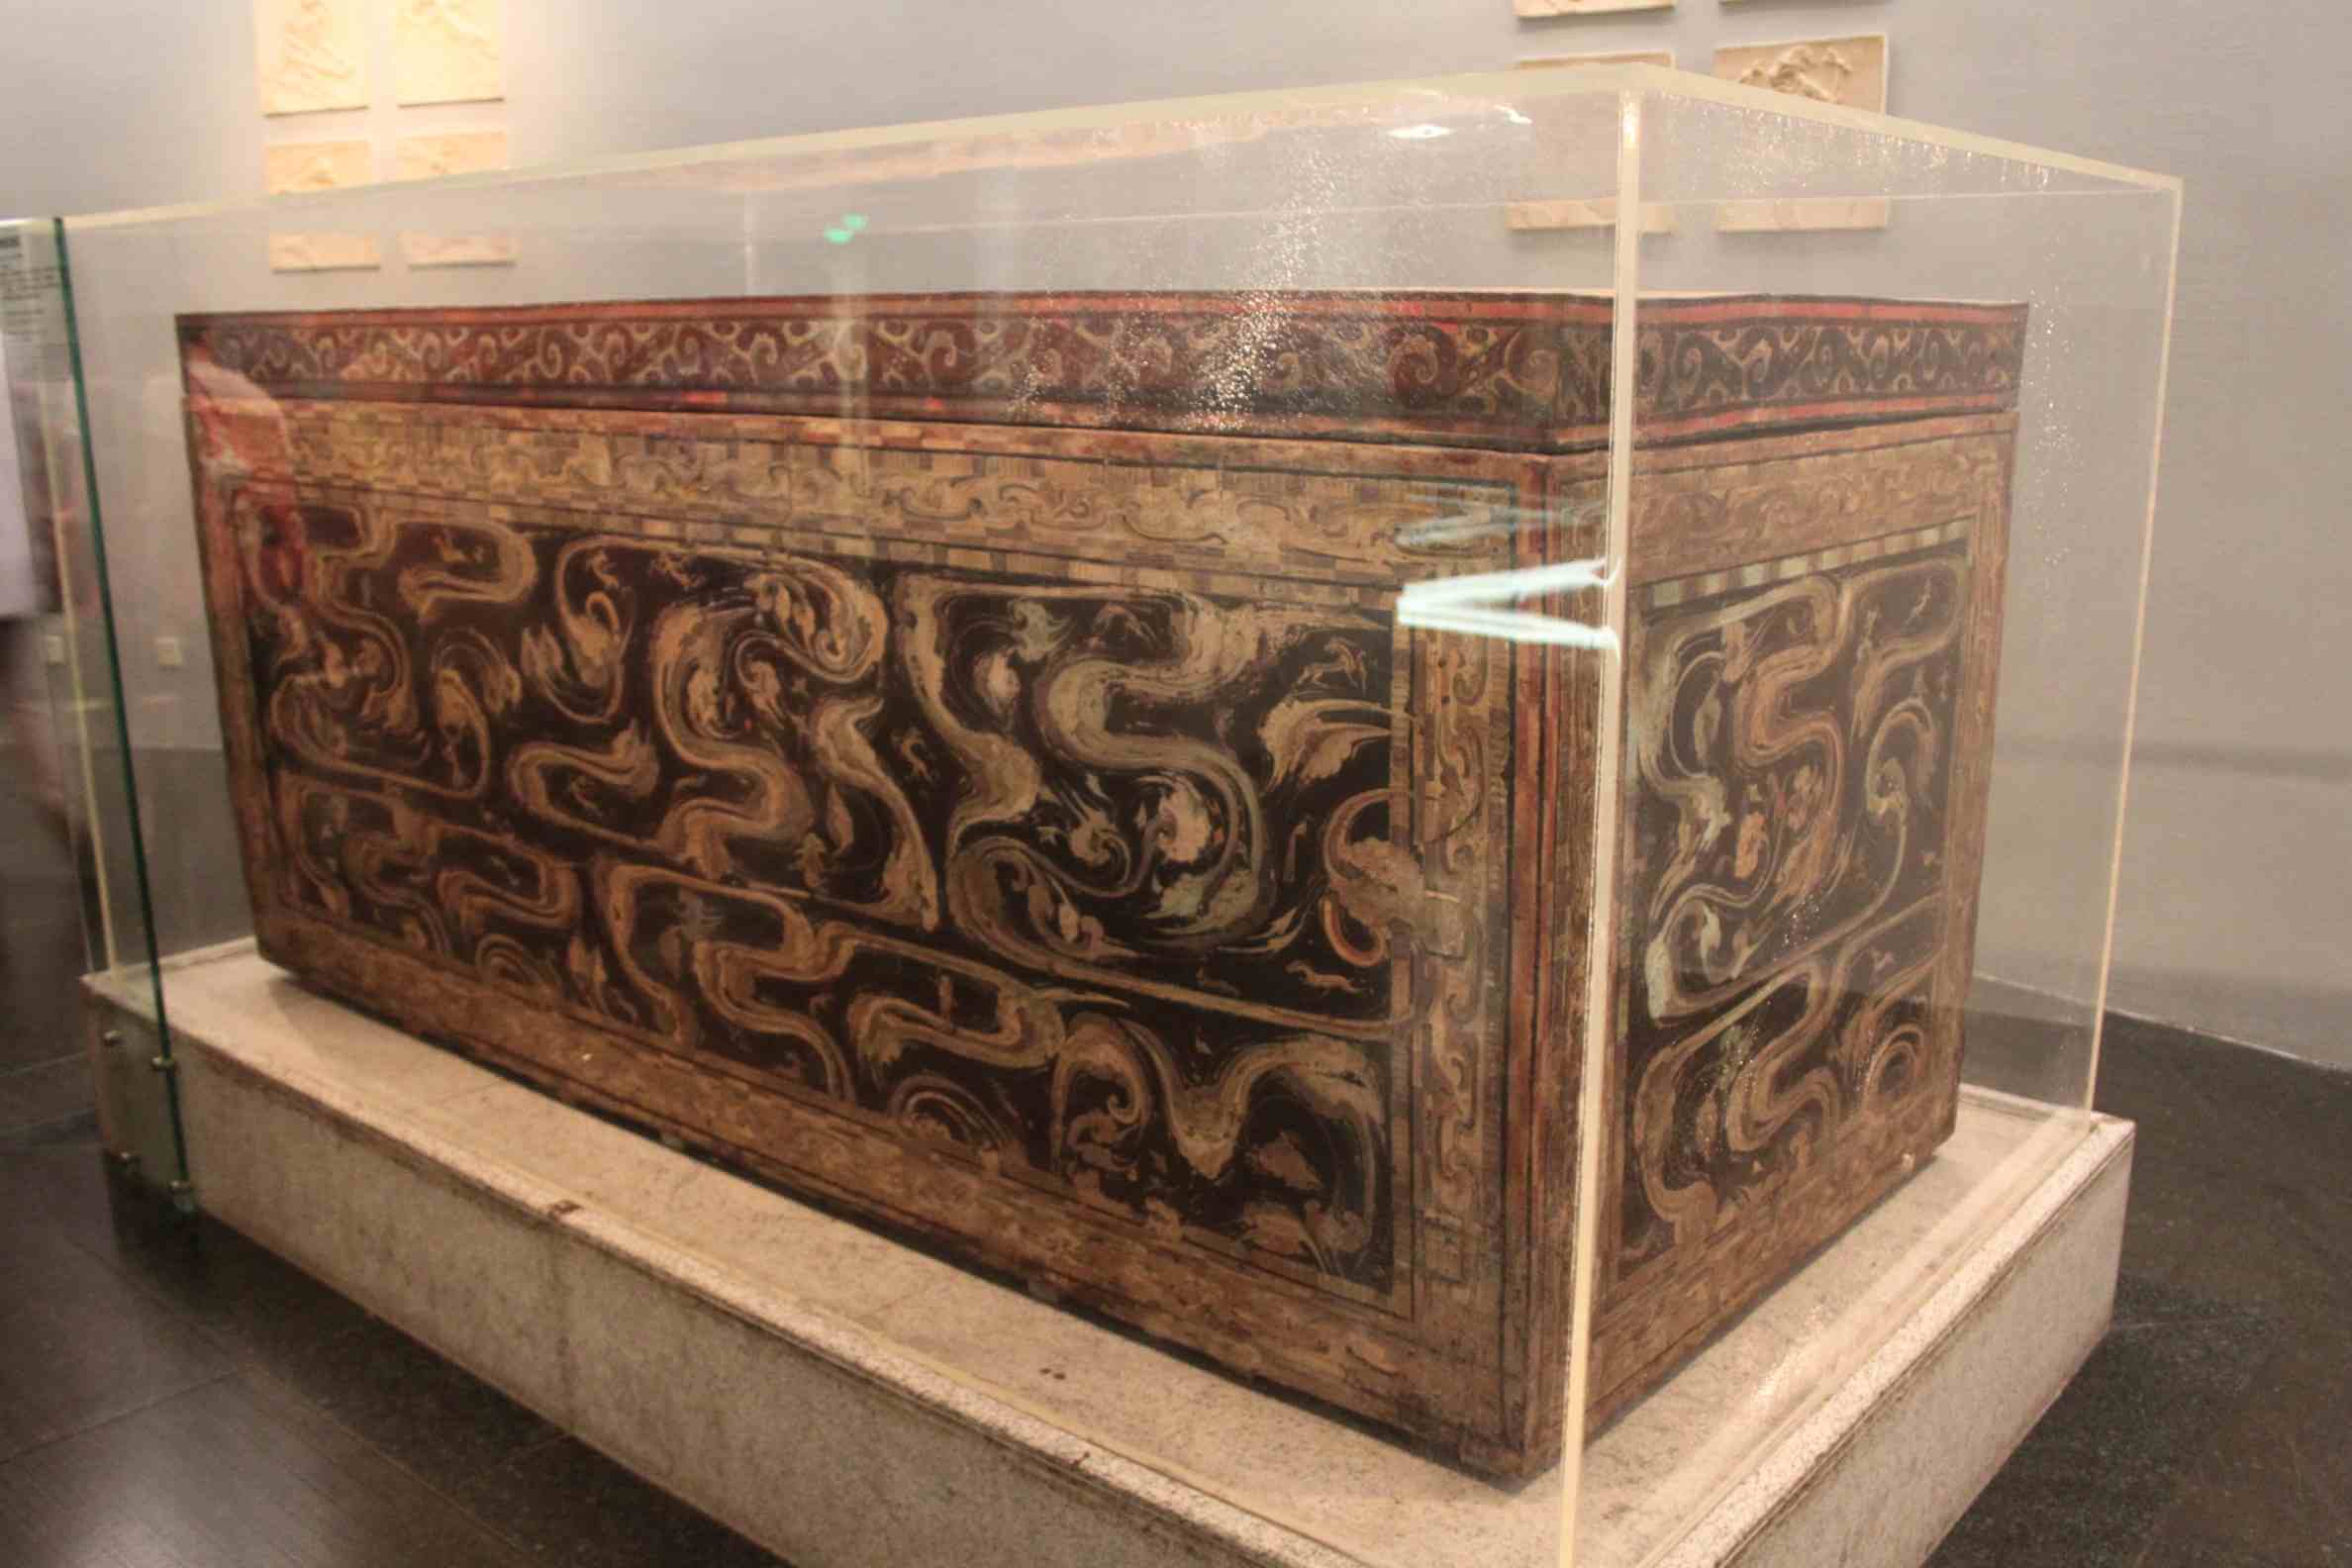 The Coffin of Xin Zhui, the Lady of Dai. ©Flickr